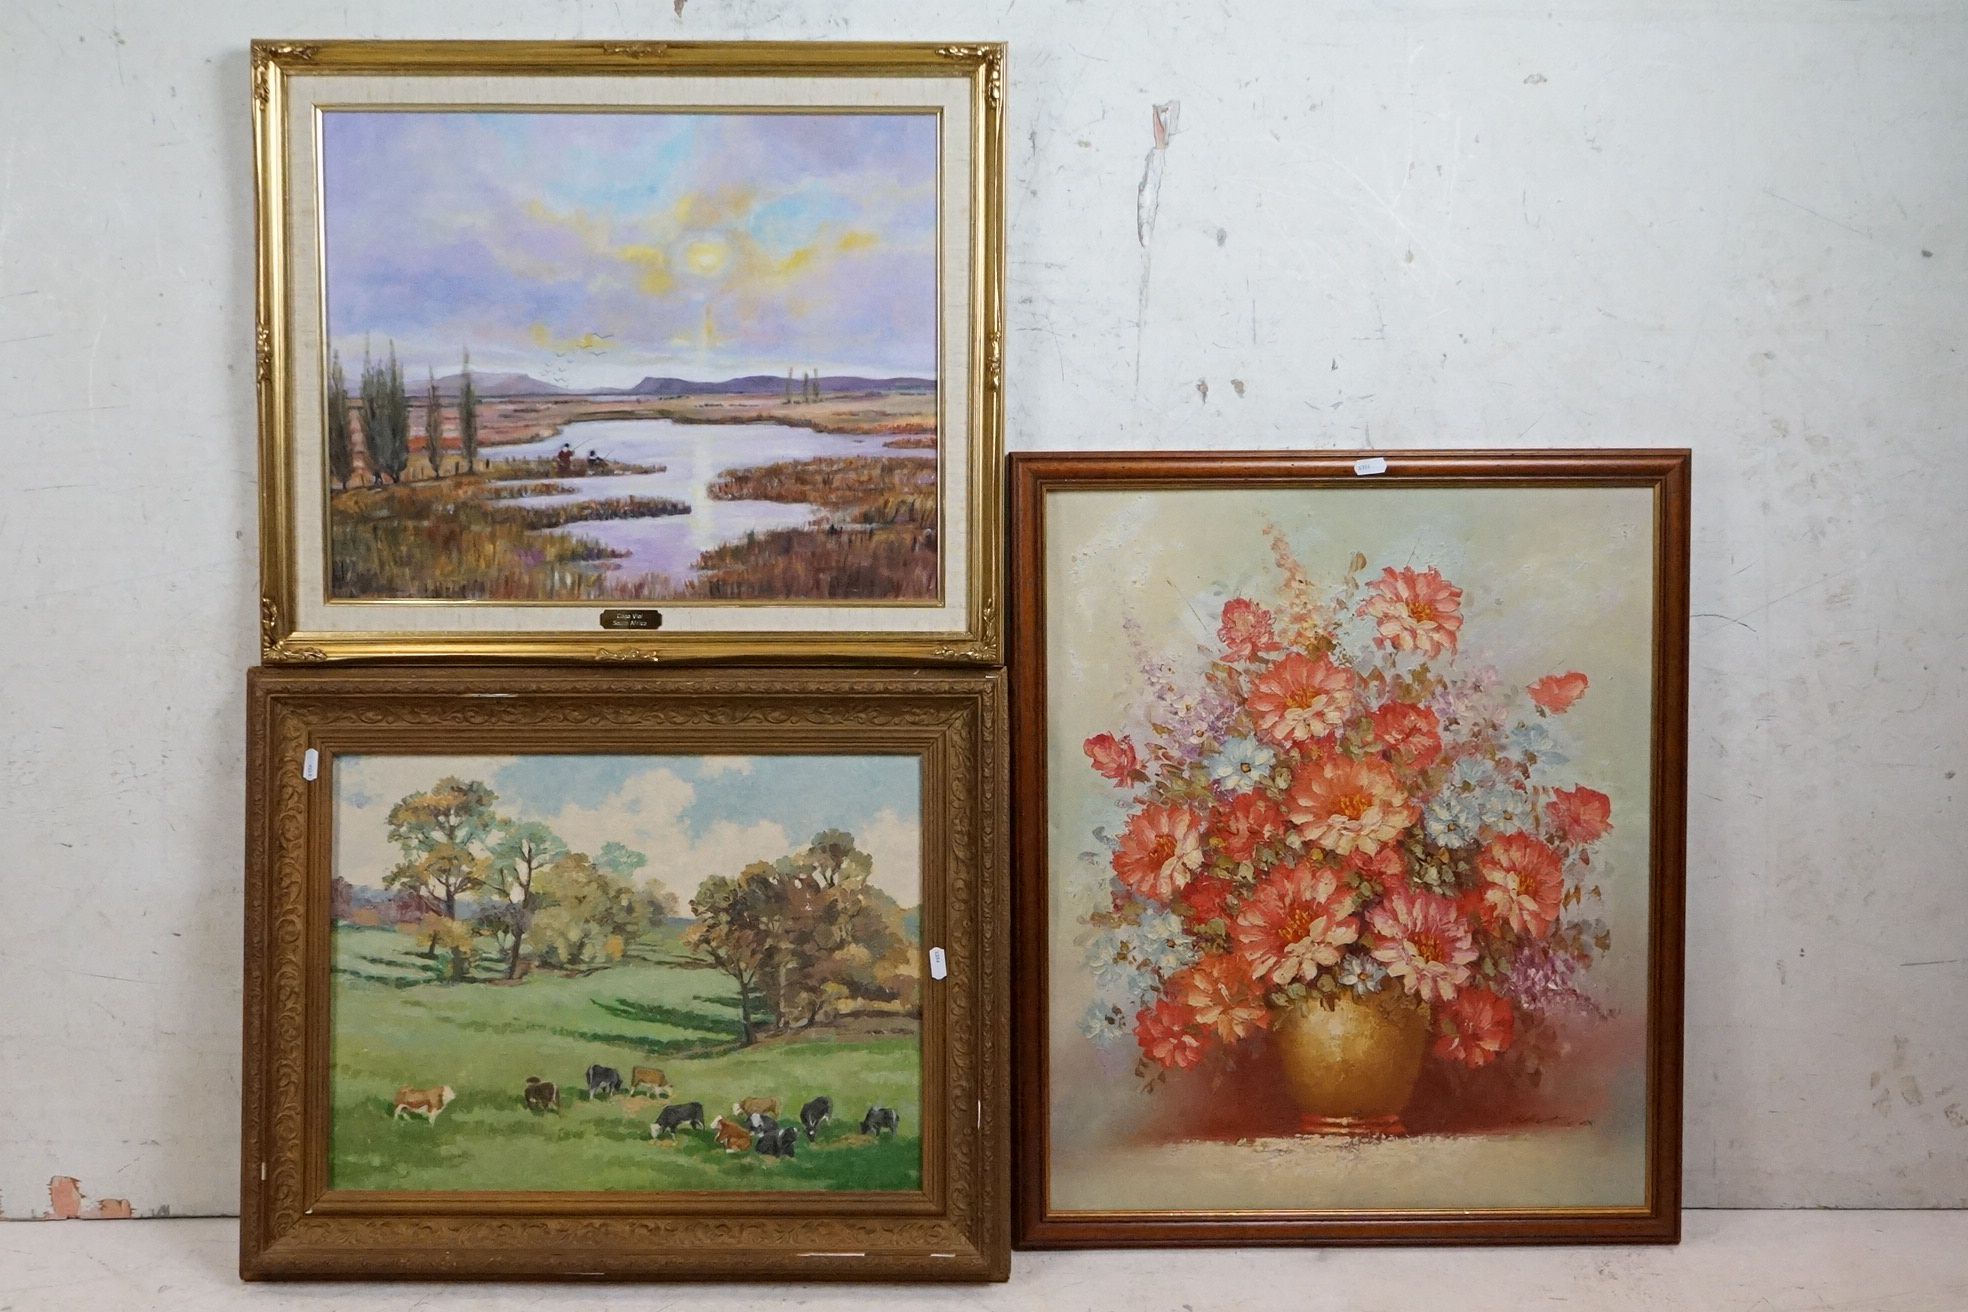 Three Oil Paintings including Cape Vlei, South Africa, Still Life Flowers in a Vase and Cattle in